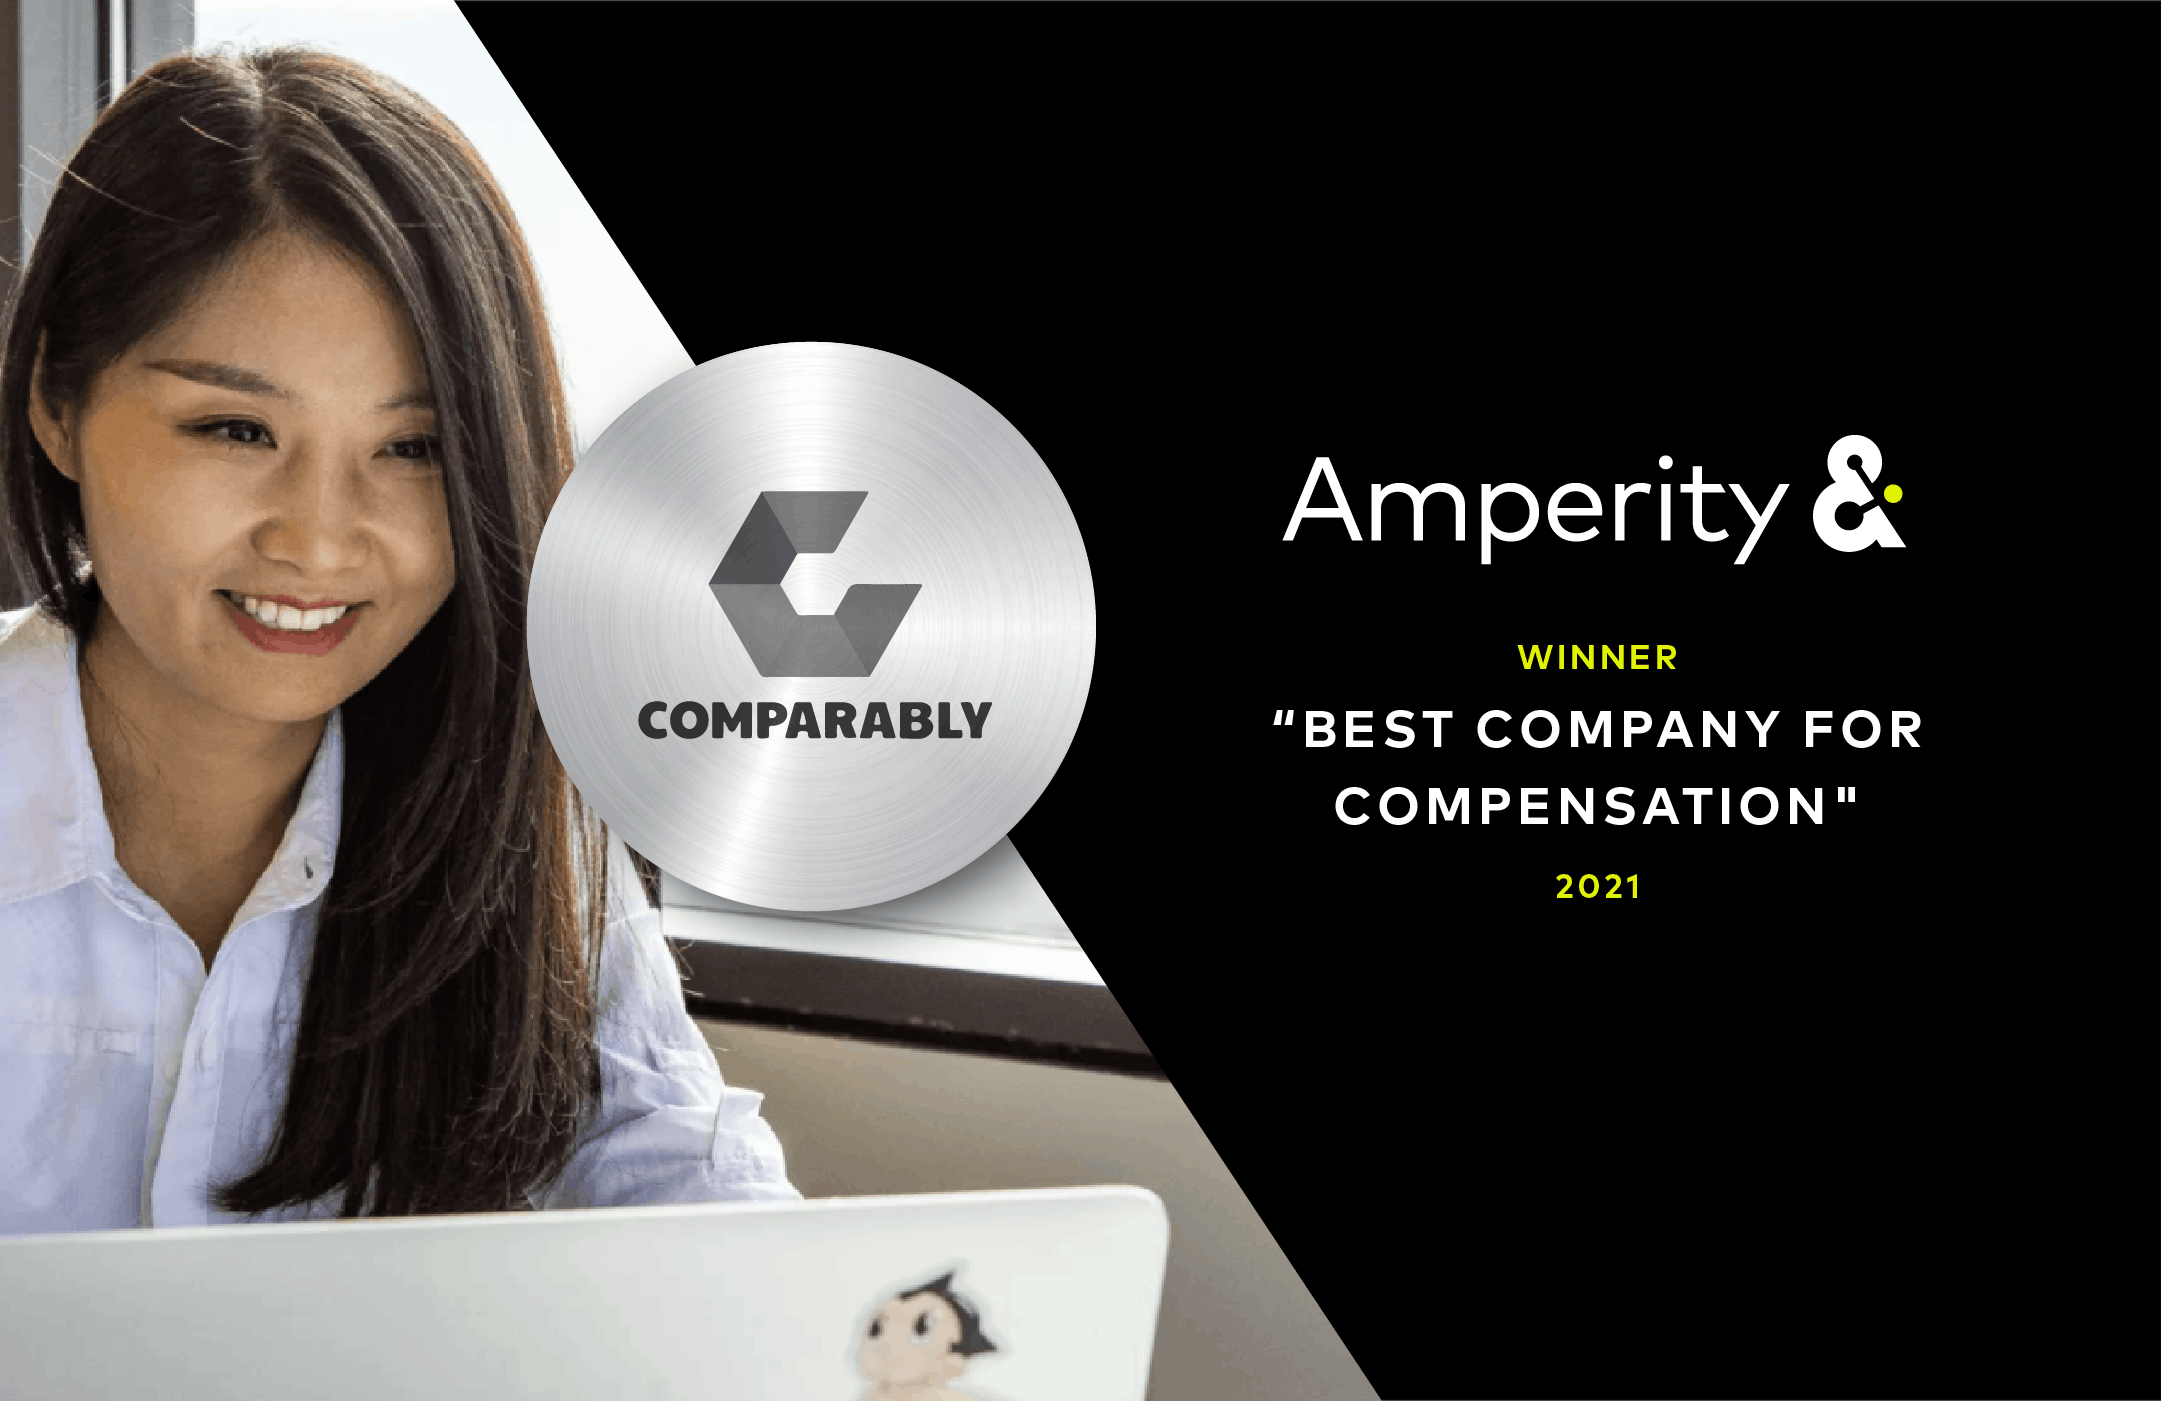 Comparably Award: Amperity as winner of "Best Company for Compensation" in 2021